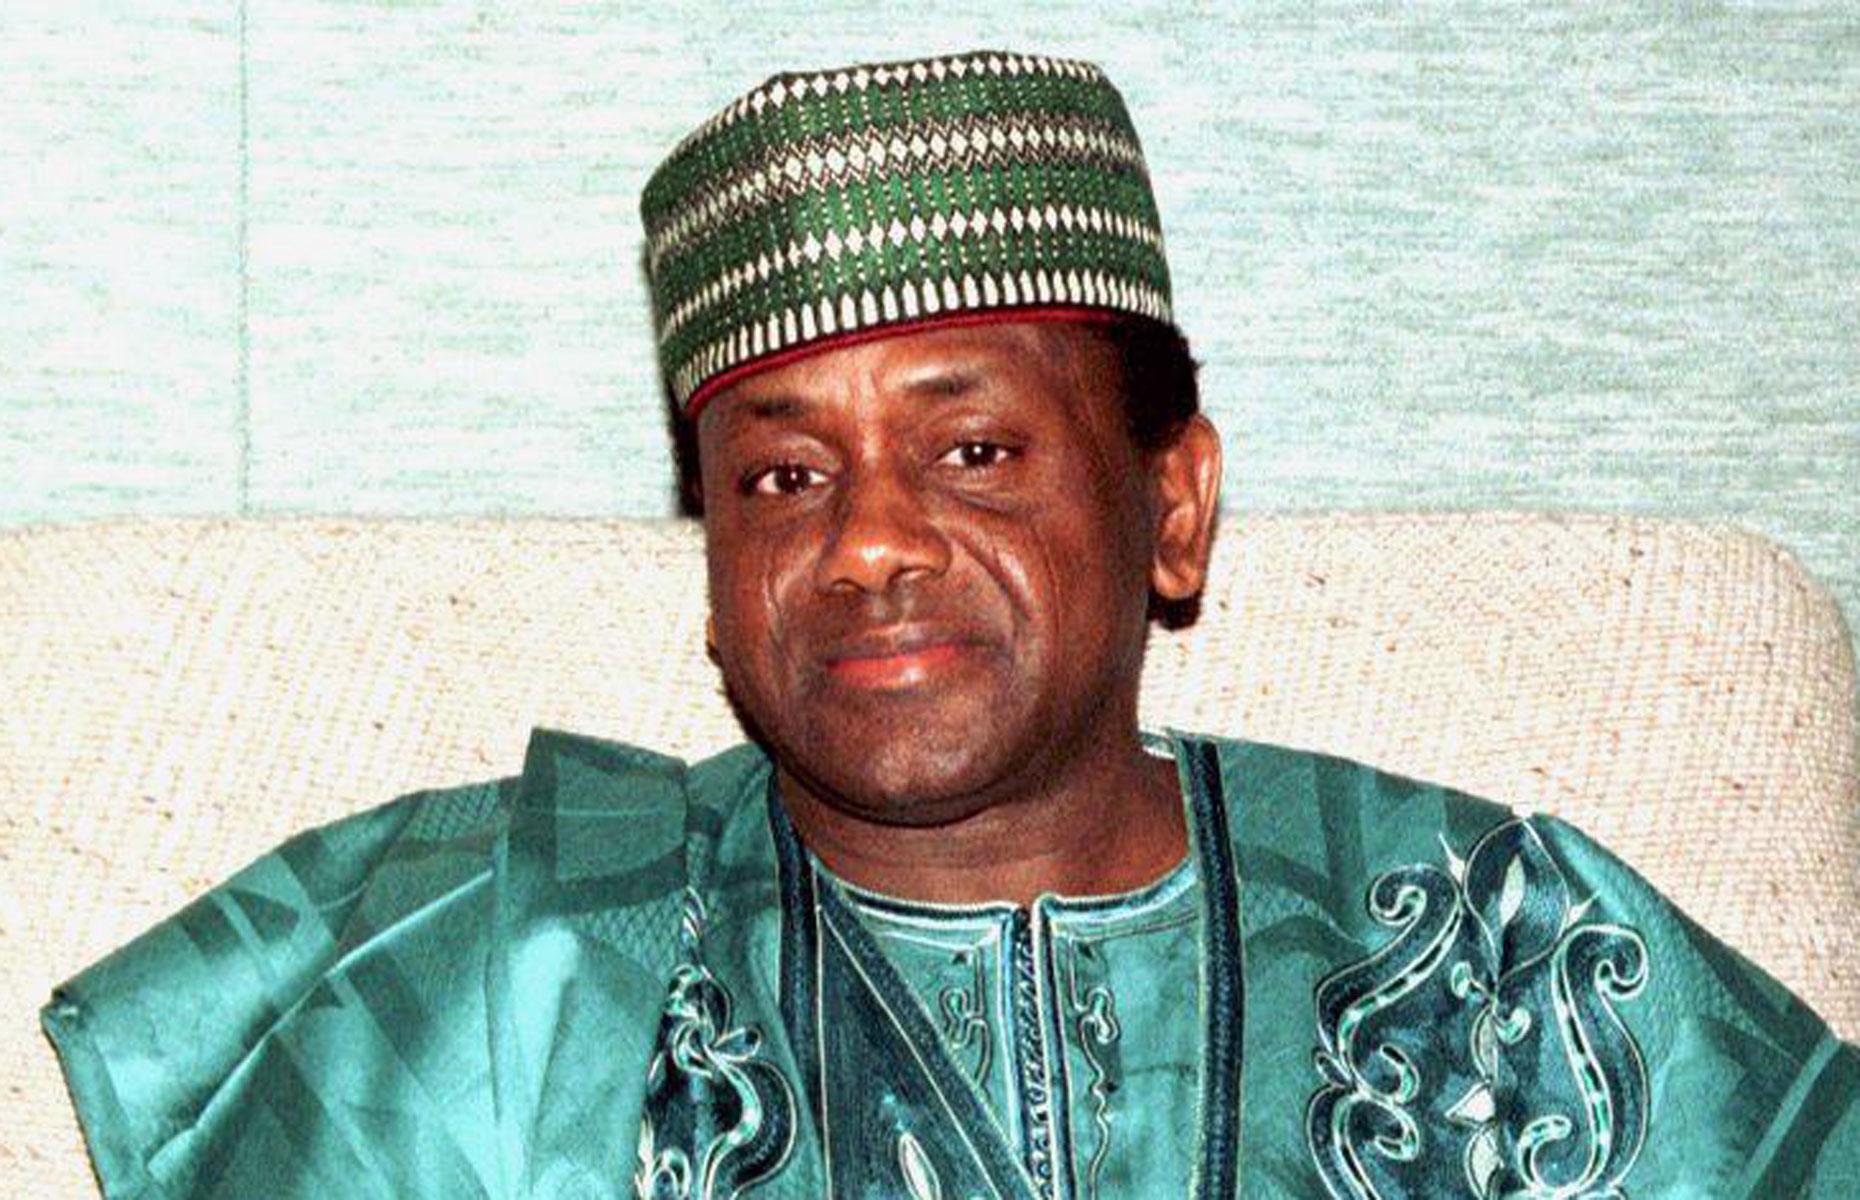 <p>Military despot Sani Abacha was the de facto leader of Nigeria from 1993 until his death in 1998. His time in office was marked by widespread human rights abuses and endemic corruption. Following the dictator's demise, the Nigerian government discovered the tyrant had squirrelled away $4 billion in secret bank accounts in Switzerland and elsewhere. In today's money that's a whopping $6.3 billion.</p>